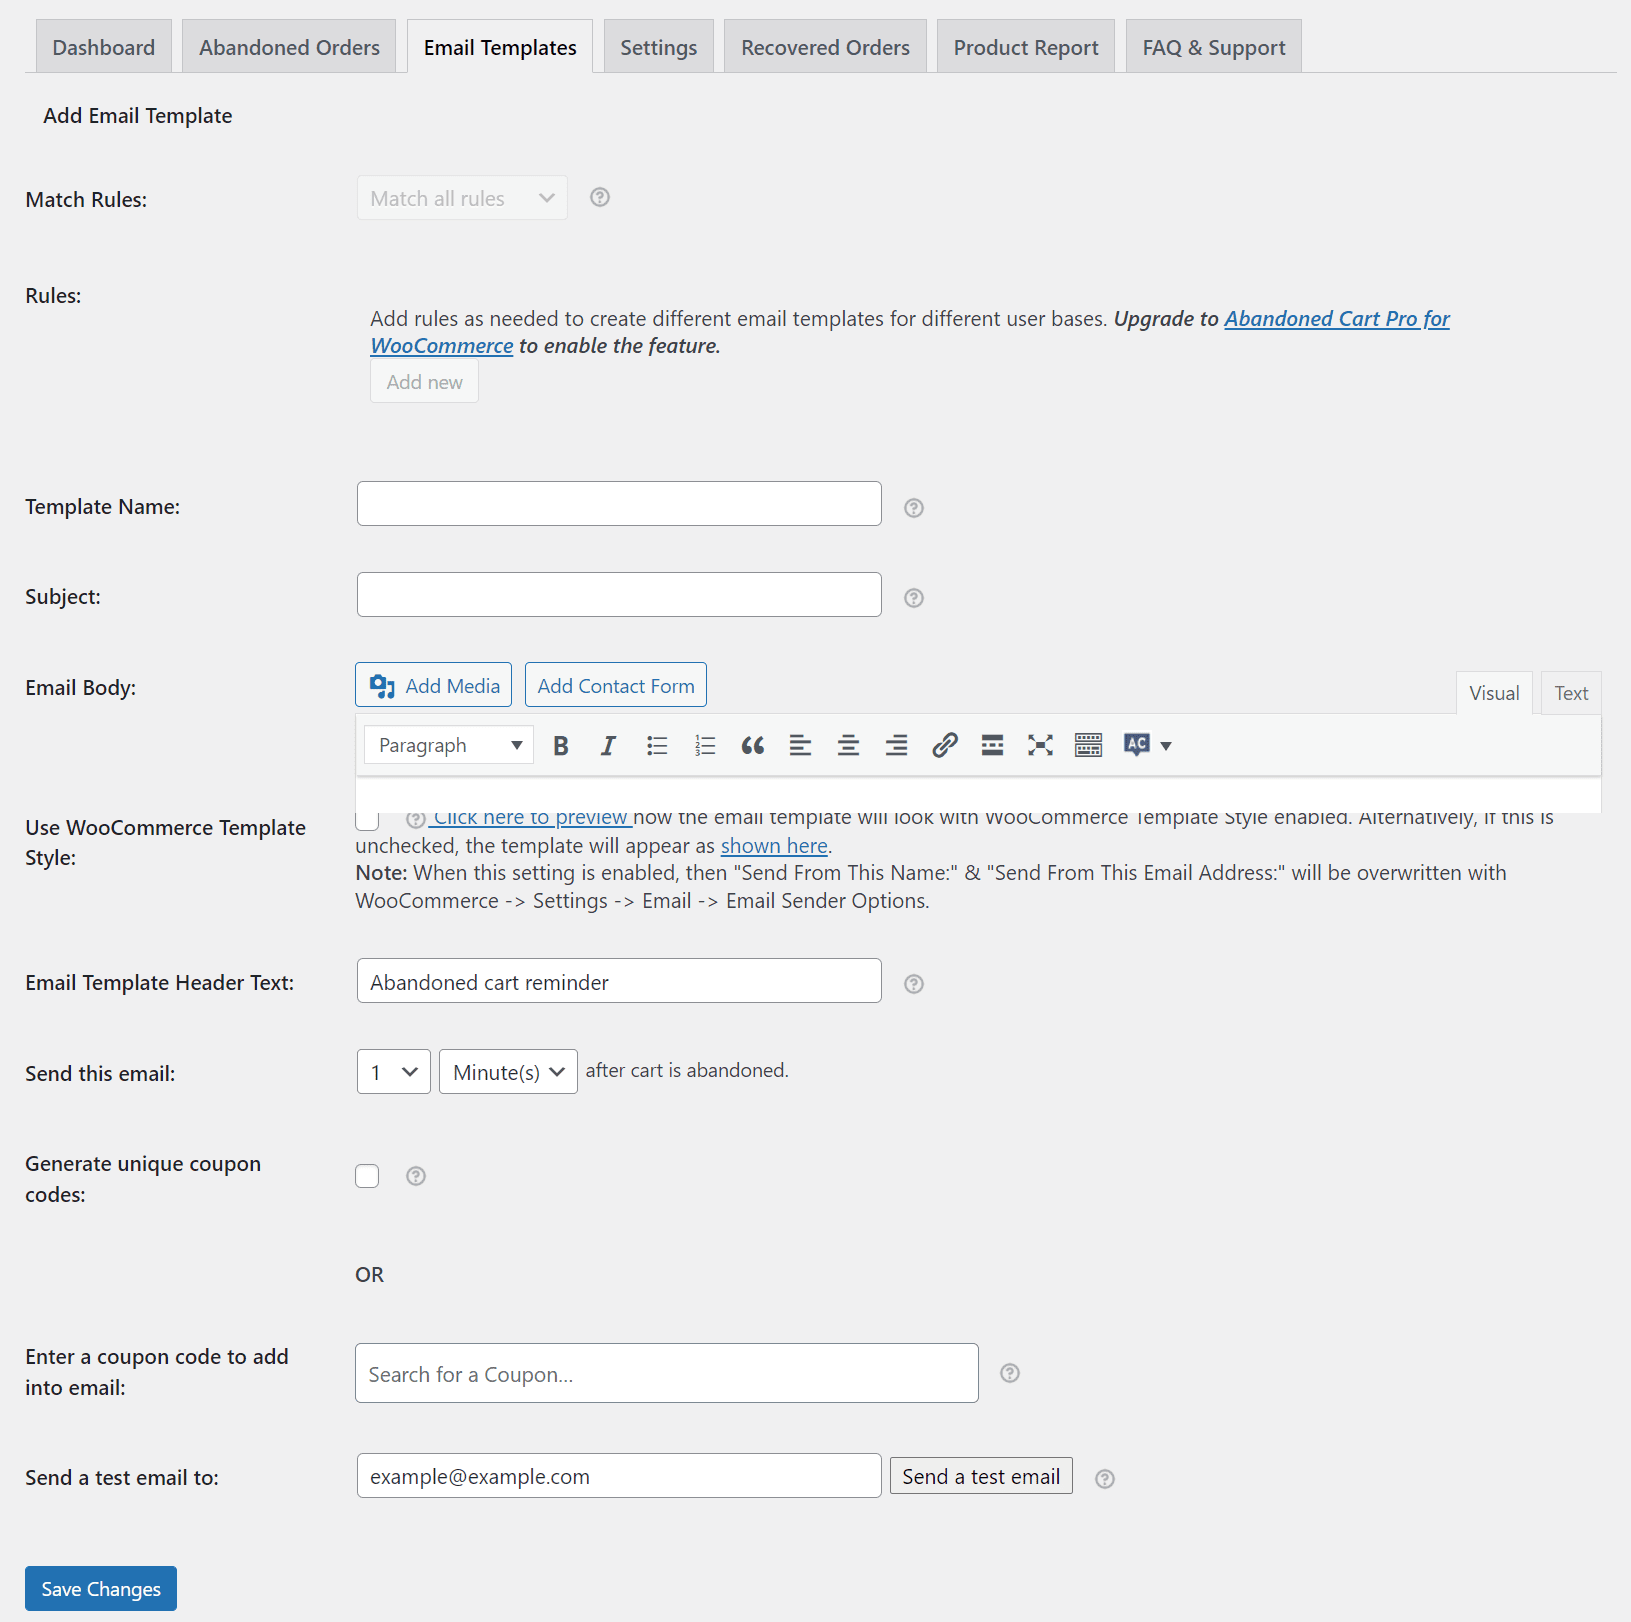 email templates settings